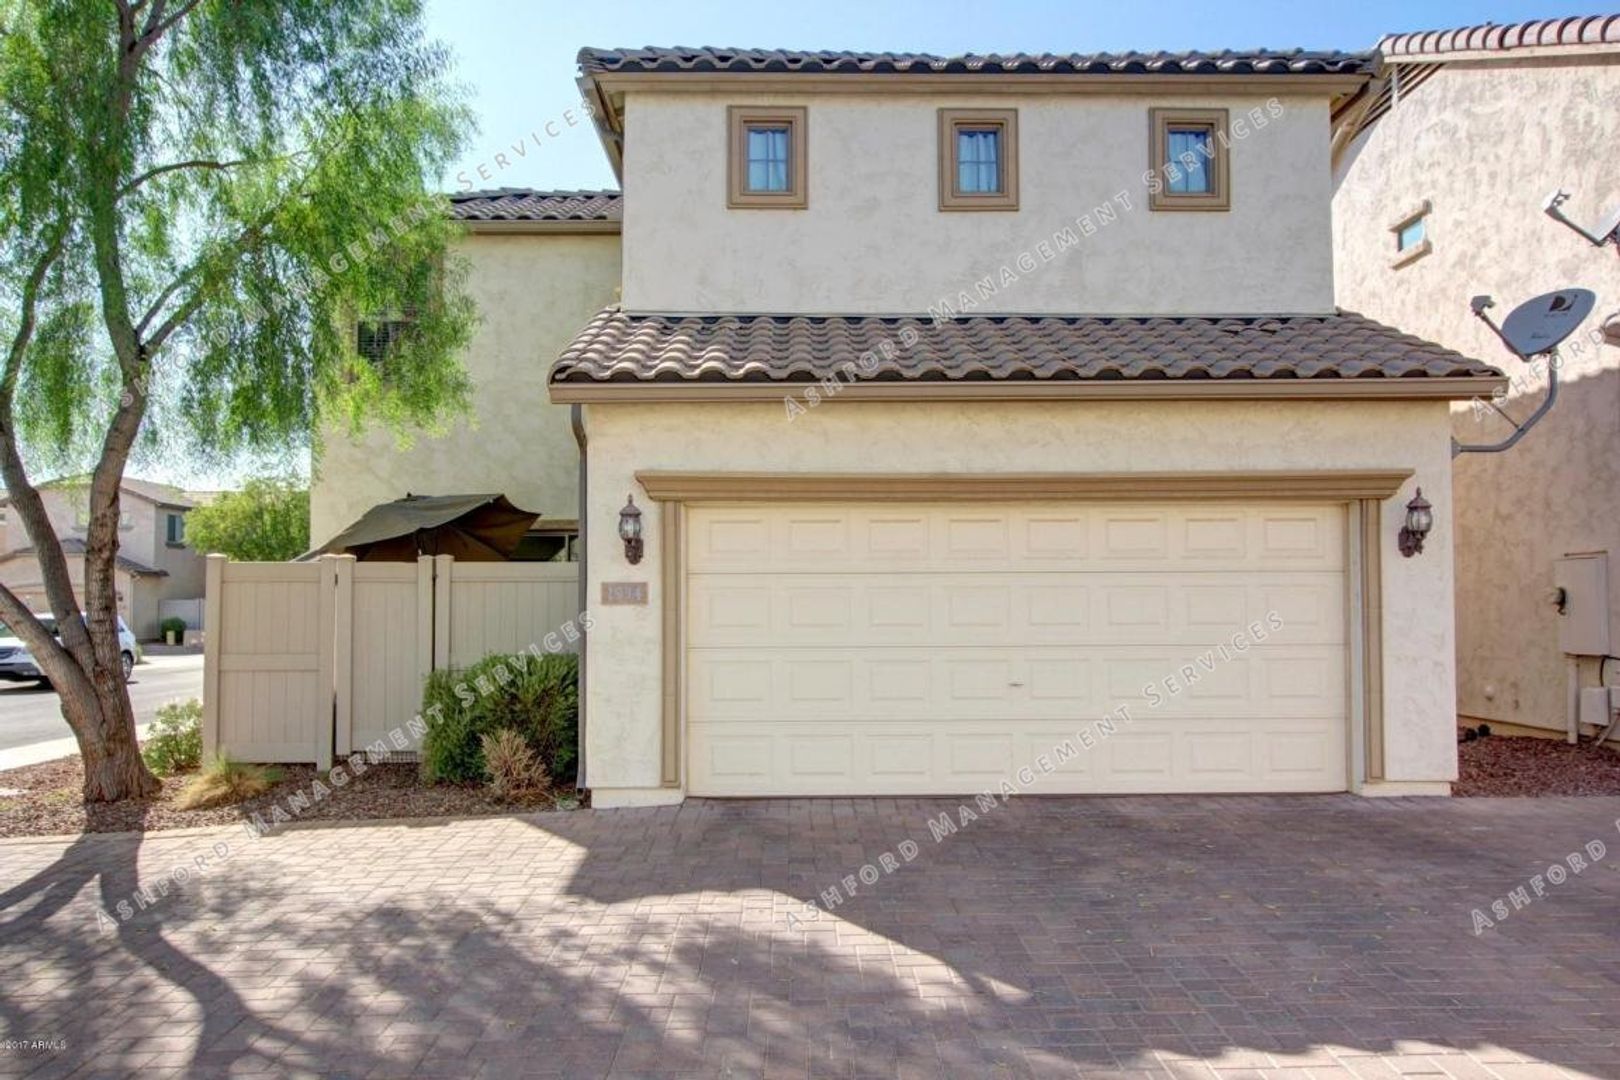 2 BEDROOM 2.5 BATH HOME IN GATED NORTHGATE WITH MANY COMMUNITY AMENITIES